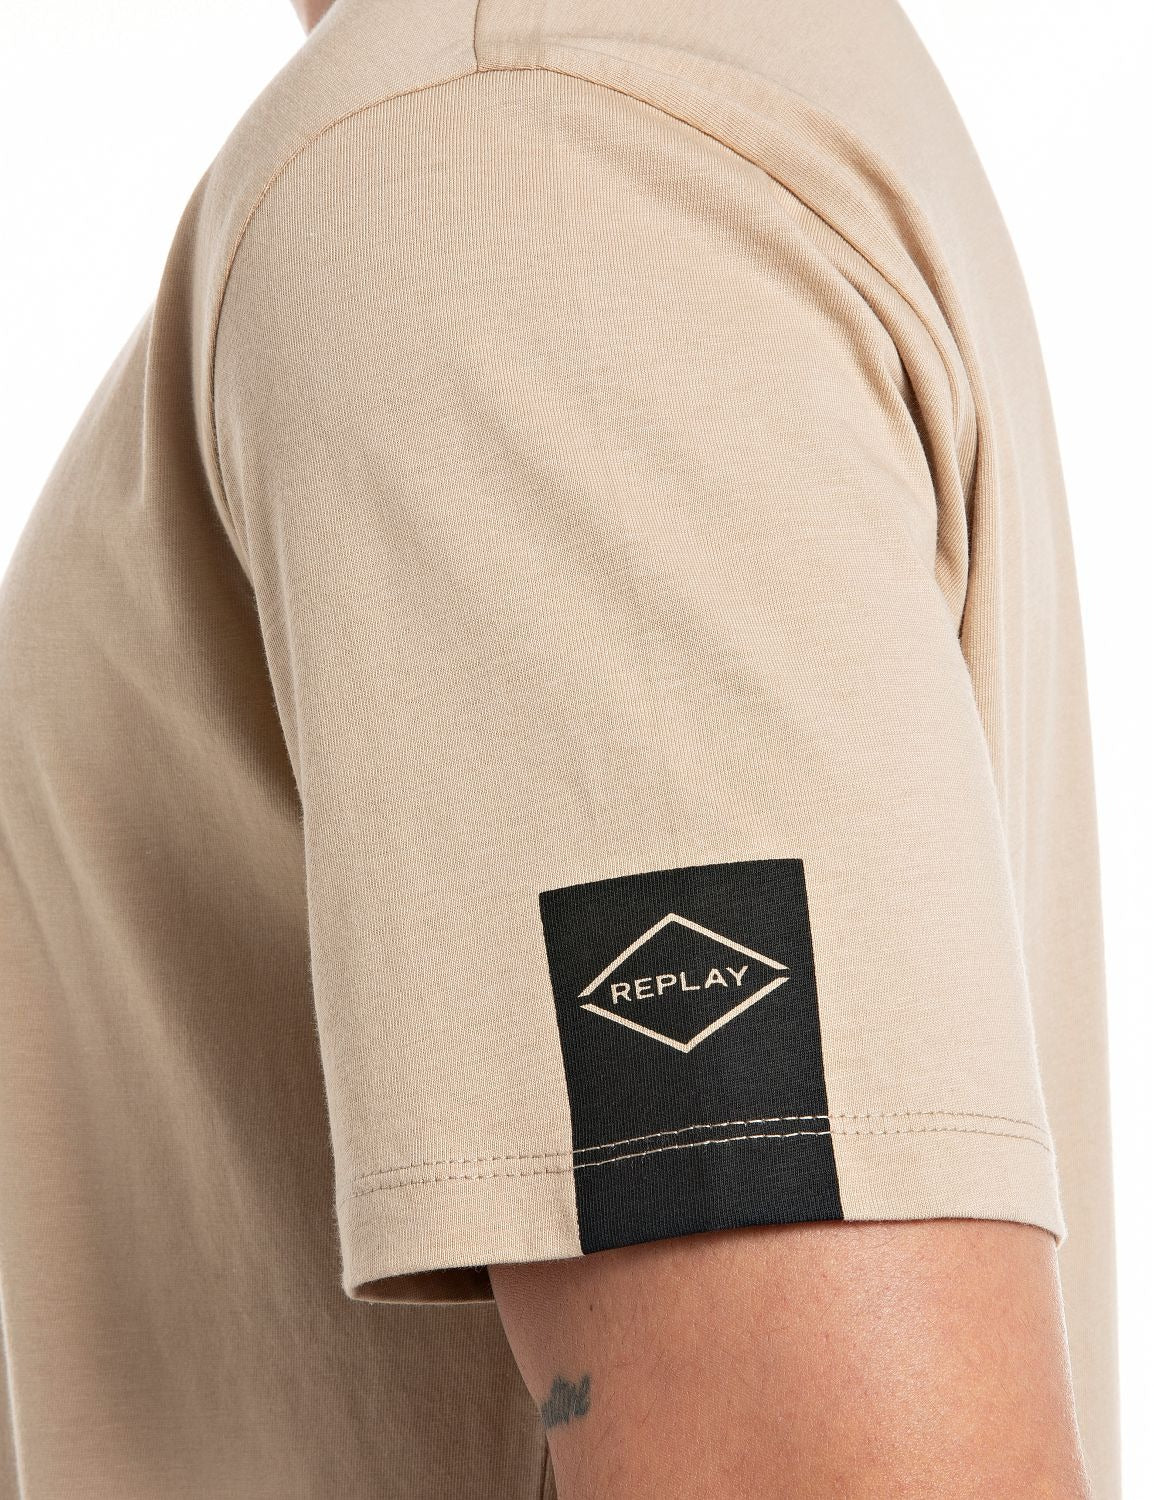 Replay Slim Fit T Shirt - Light Taupe